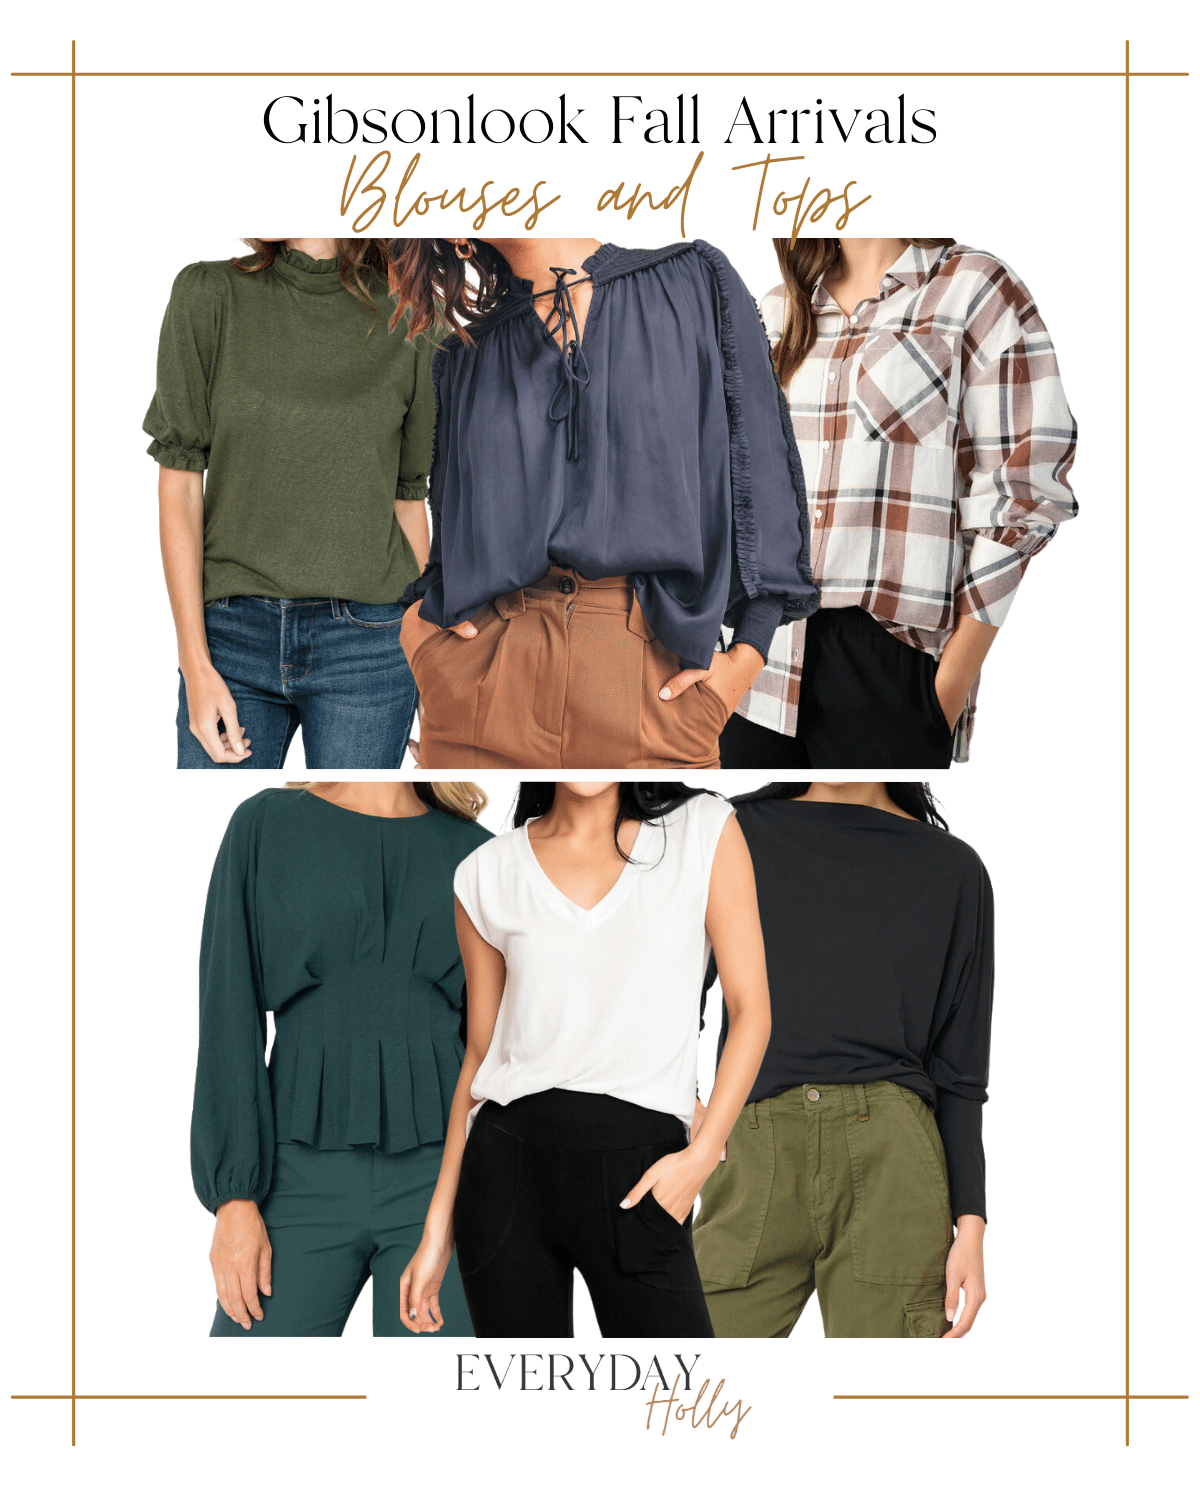 fall pieces you will want in your closet | #fall #autumn #wardrobe #closet #gibsonlook #fashion #fallfashion #neutral #blouse #top #chic #plaid #tunic #vneck #jewel #slouchy #neutral #buttondown #oversize